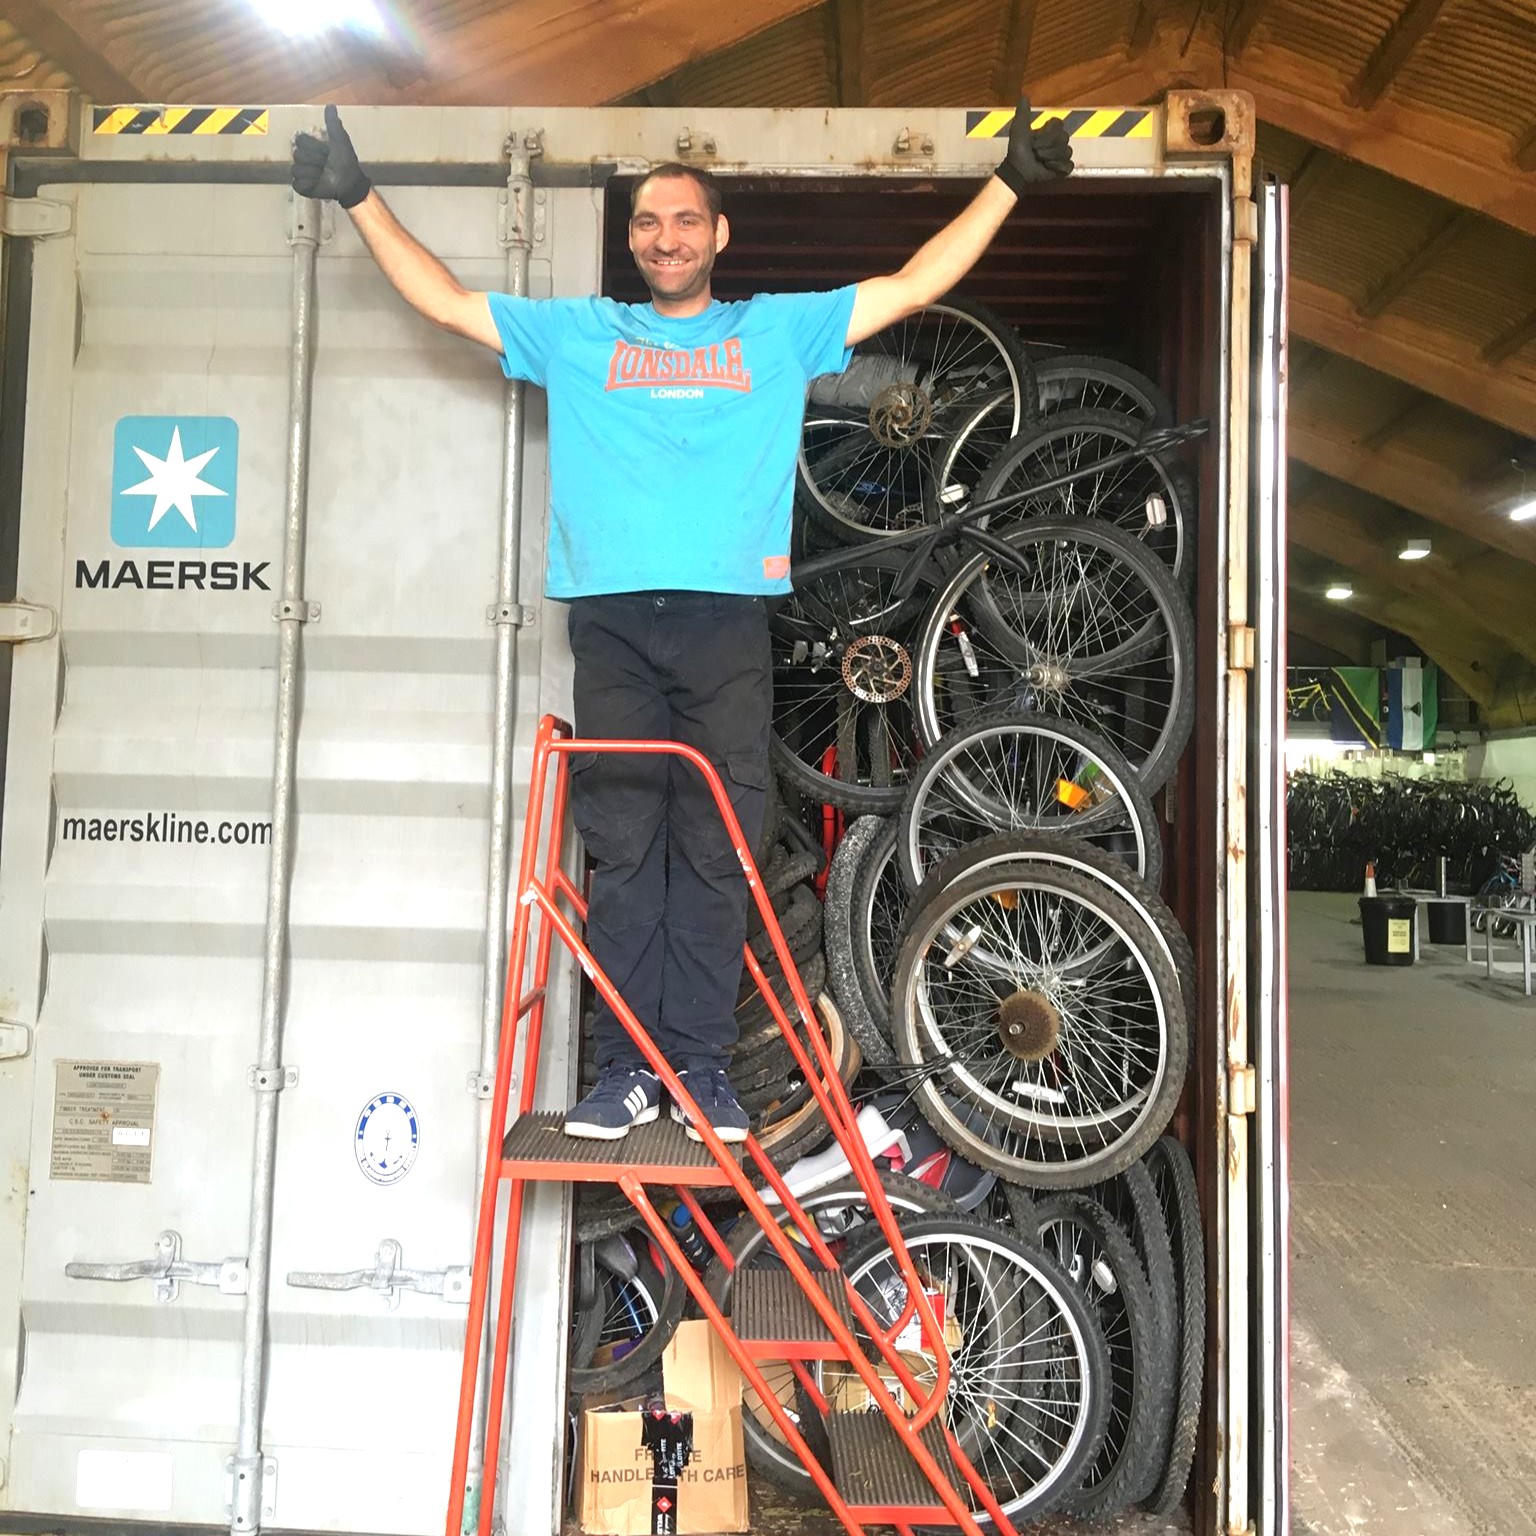 2018 100000 bike to africa
Ryan in warehouse container essex